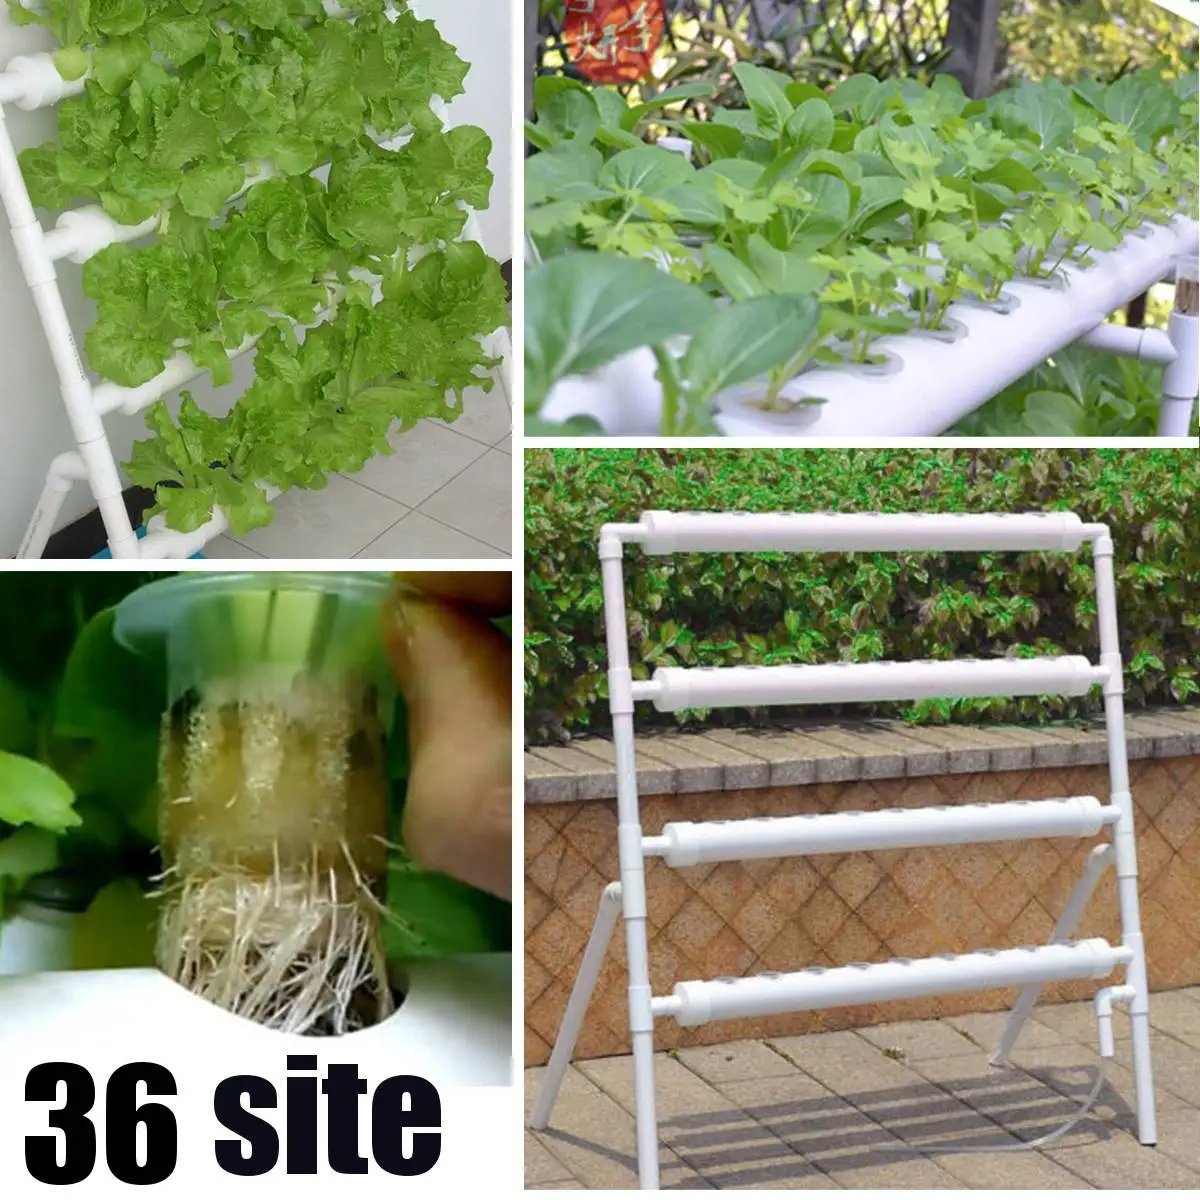 

NEW 36 Planting Sites 4 Layers Horizontal Hydroponic Grow Kit Garden Plant Vegetable Planting Grow Box Deep Water Culture System